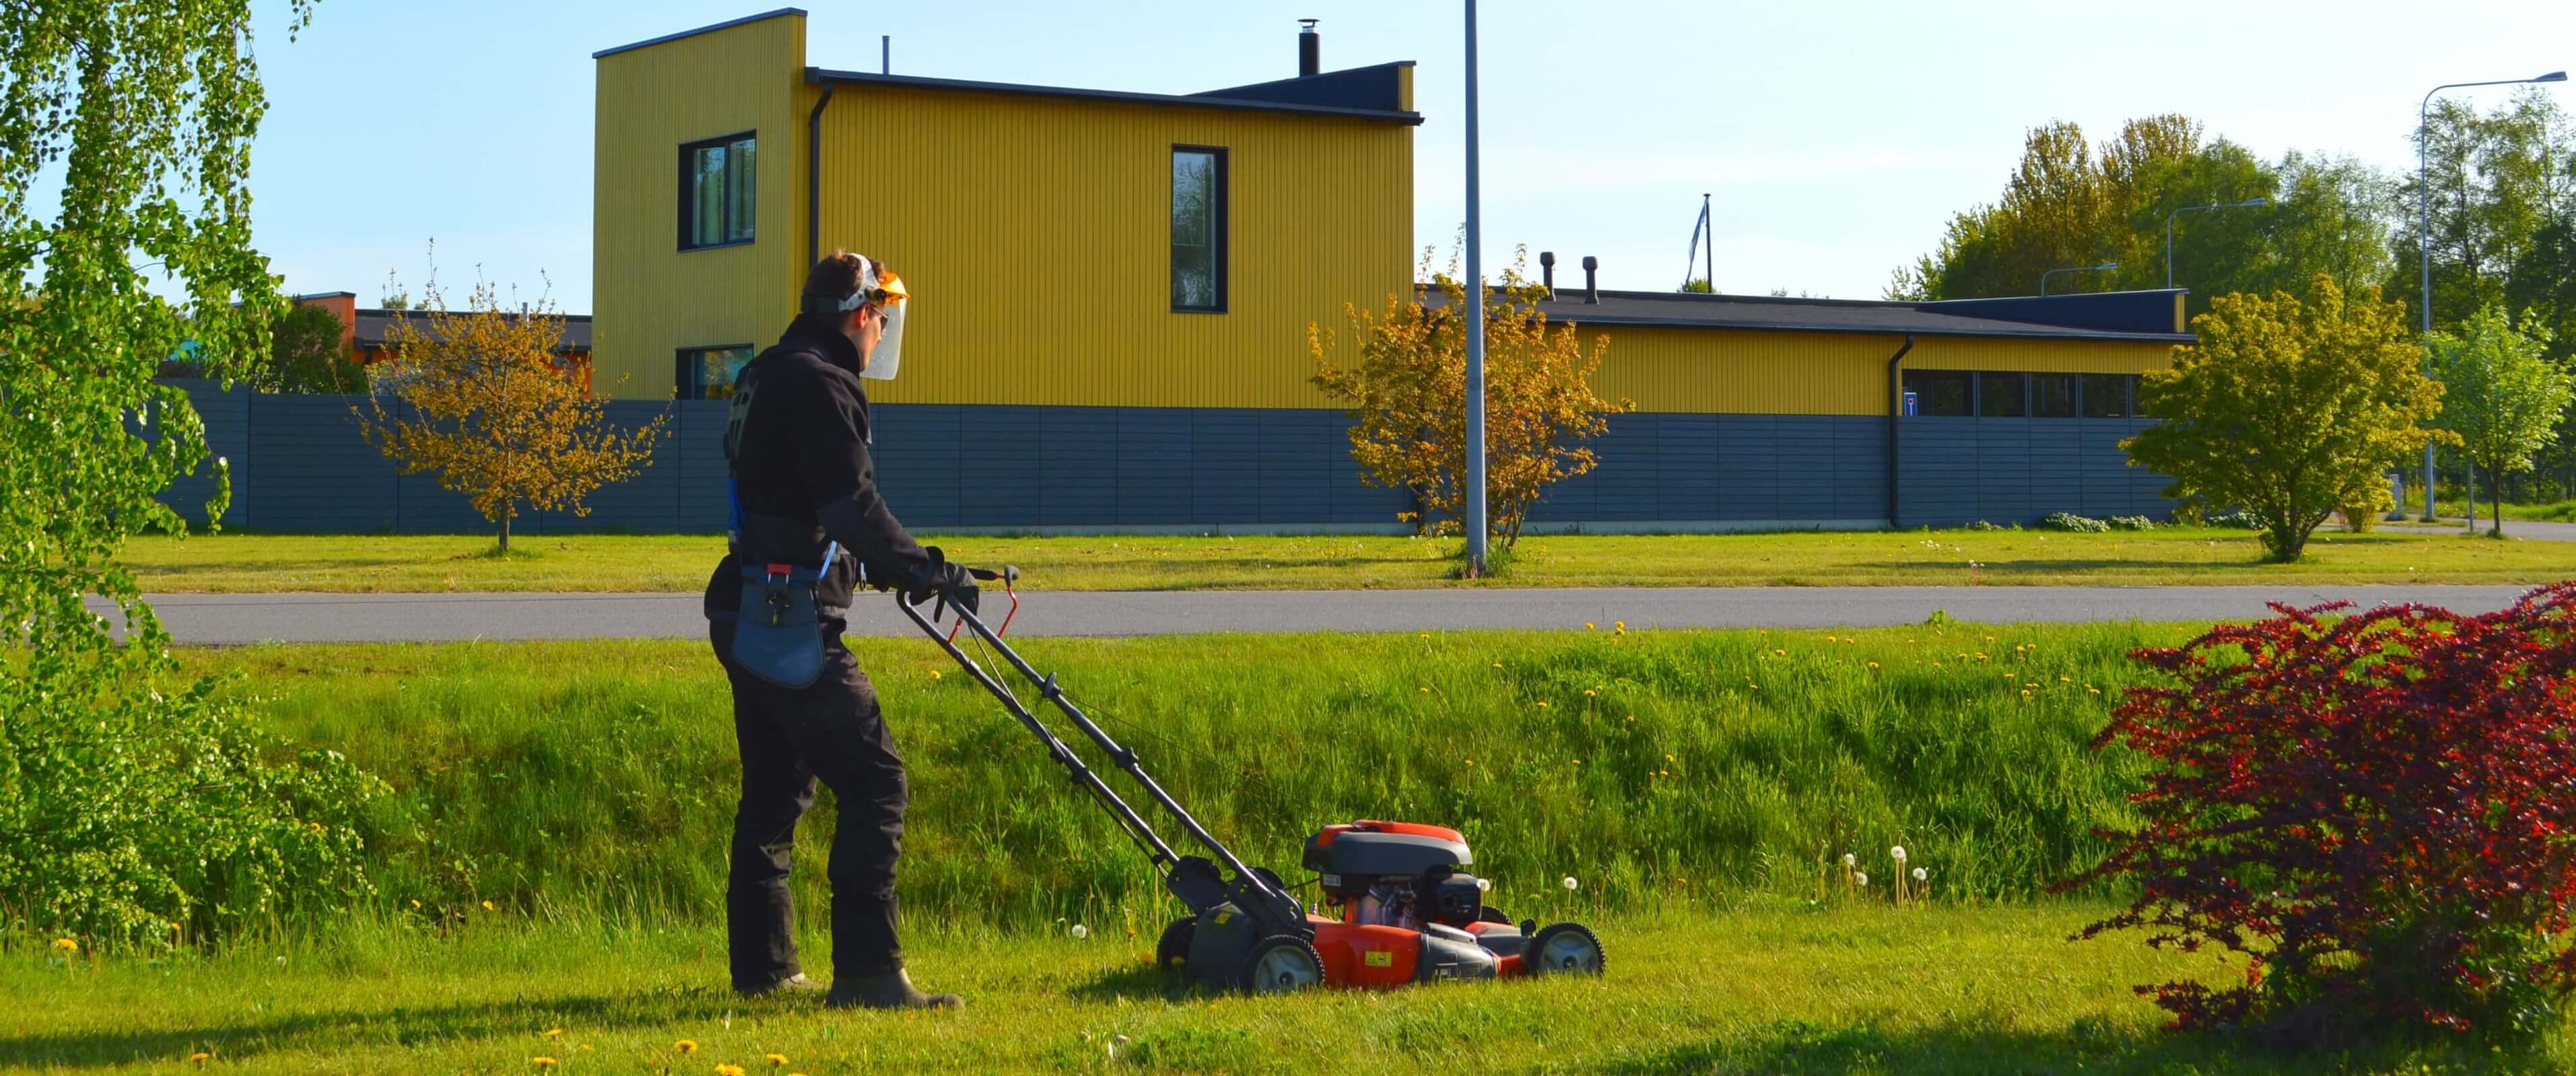 Landscaping in the autumn season: maintenance of the territory, leaves cleaning and the last lawn mowing  before winter